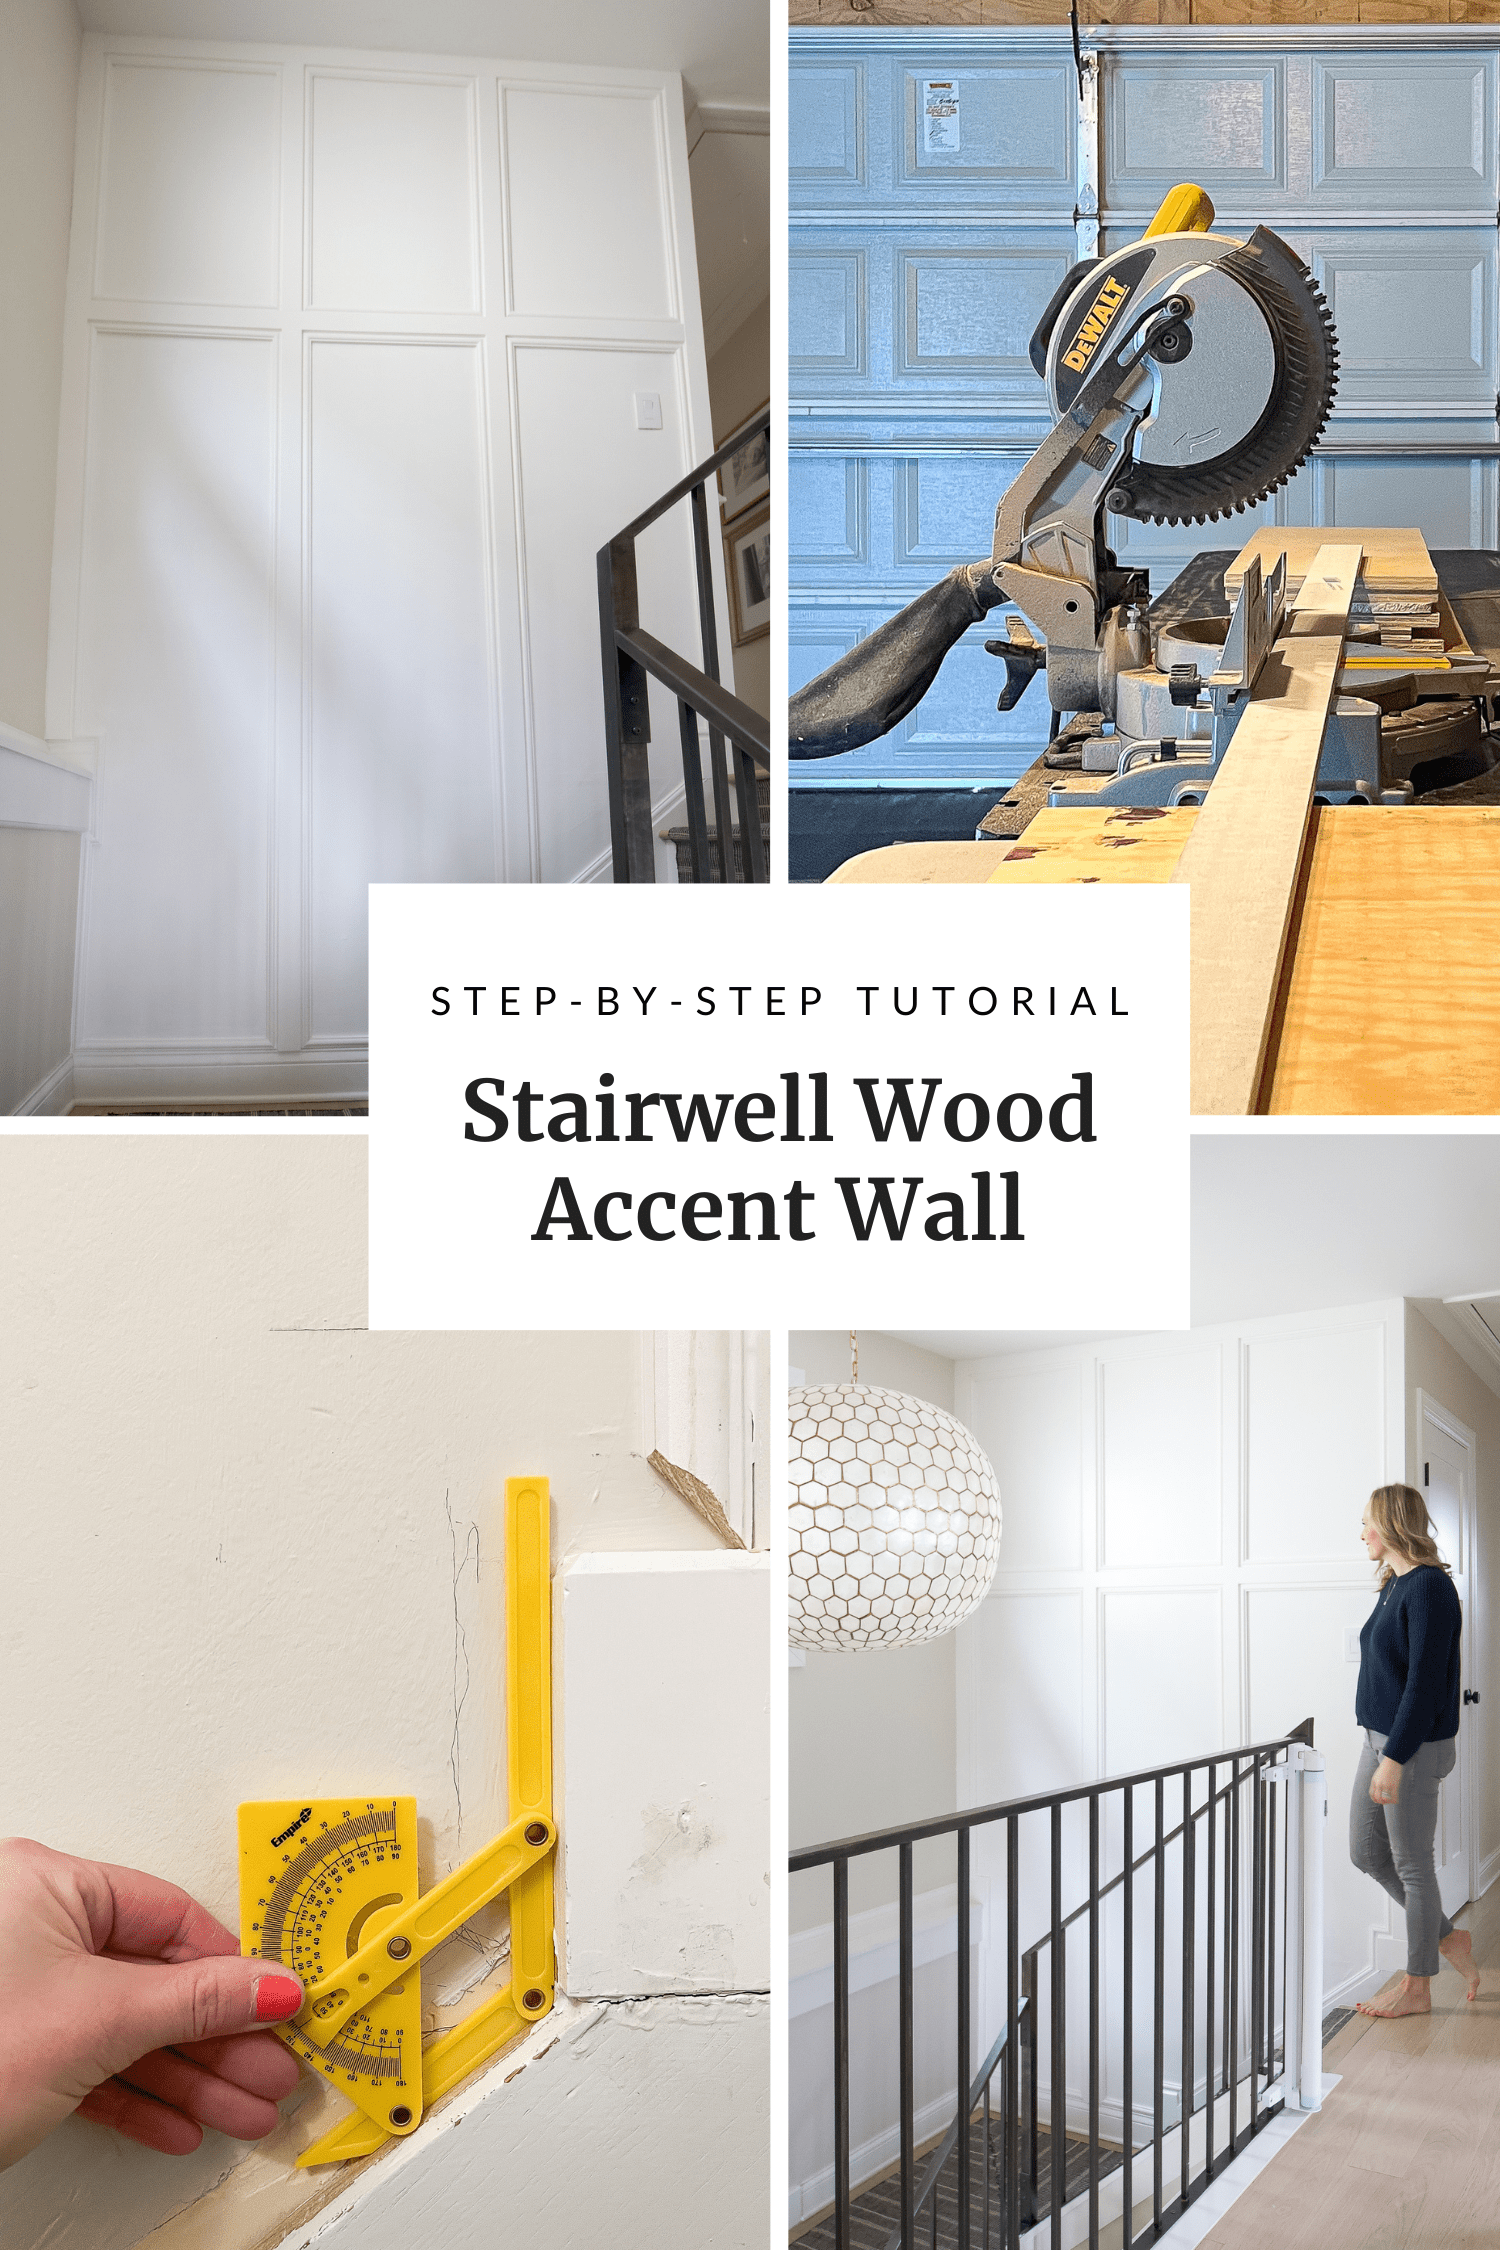 My best tips to install a stairwell accent wall using wood molding